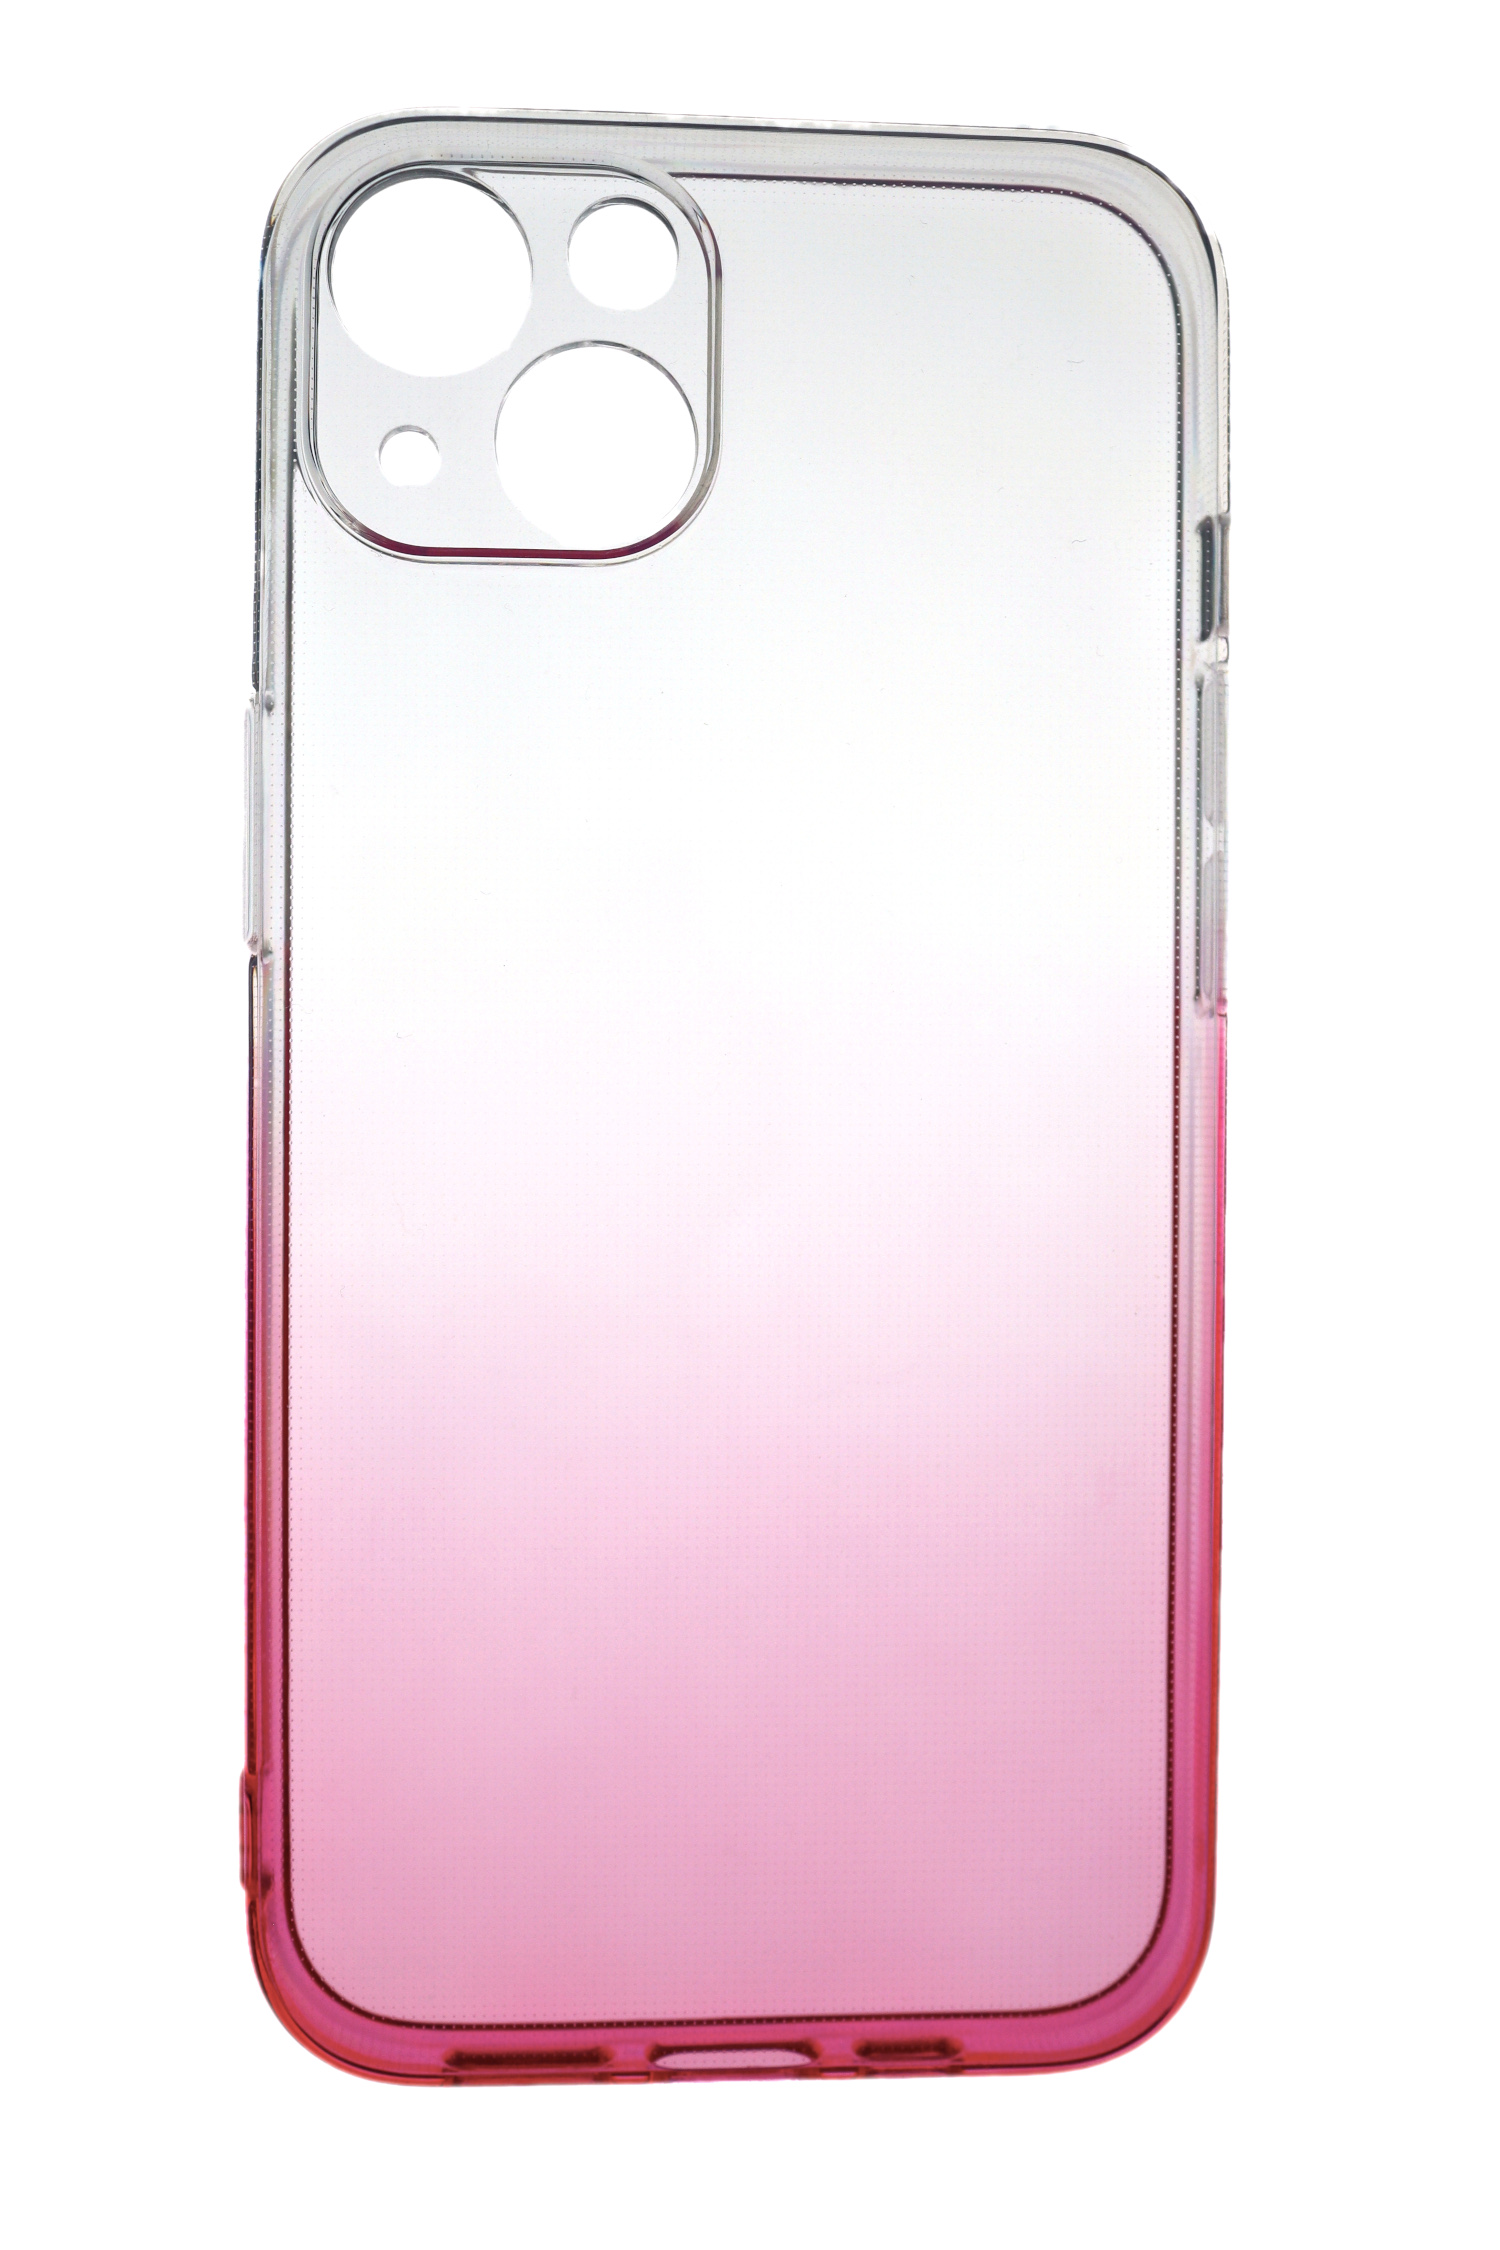 Apple, Backcover, Transparent mm Strong, 2.0 iPhone 14, TPU JAMCOVER Case Pink,